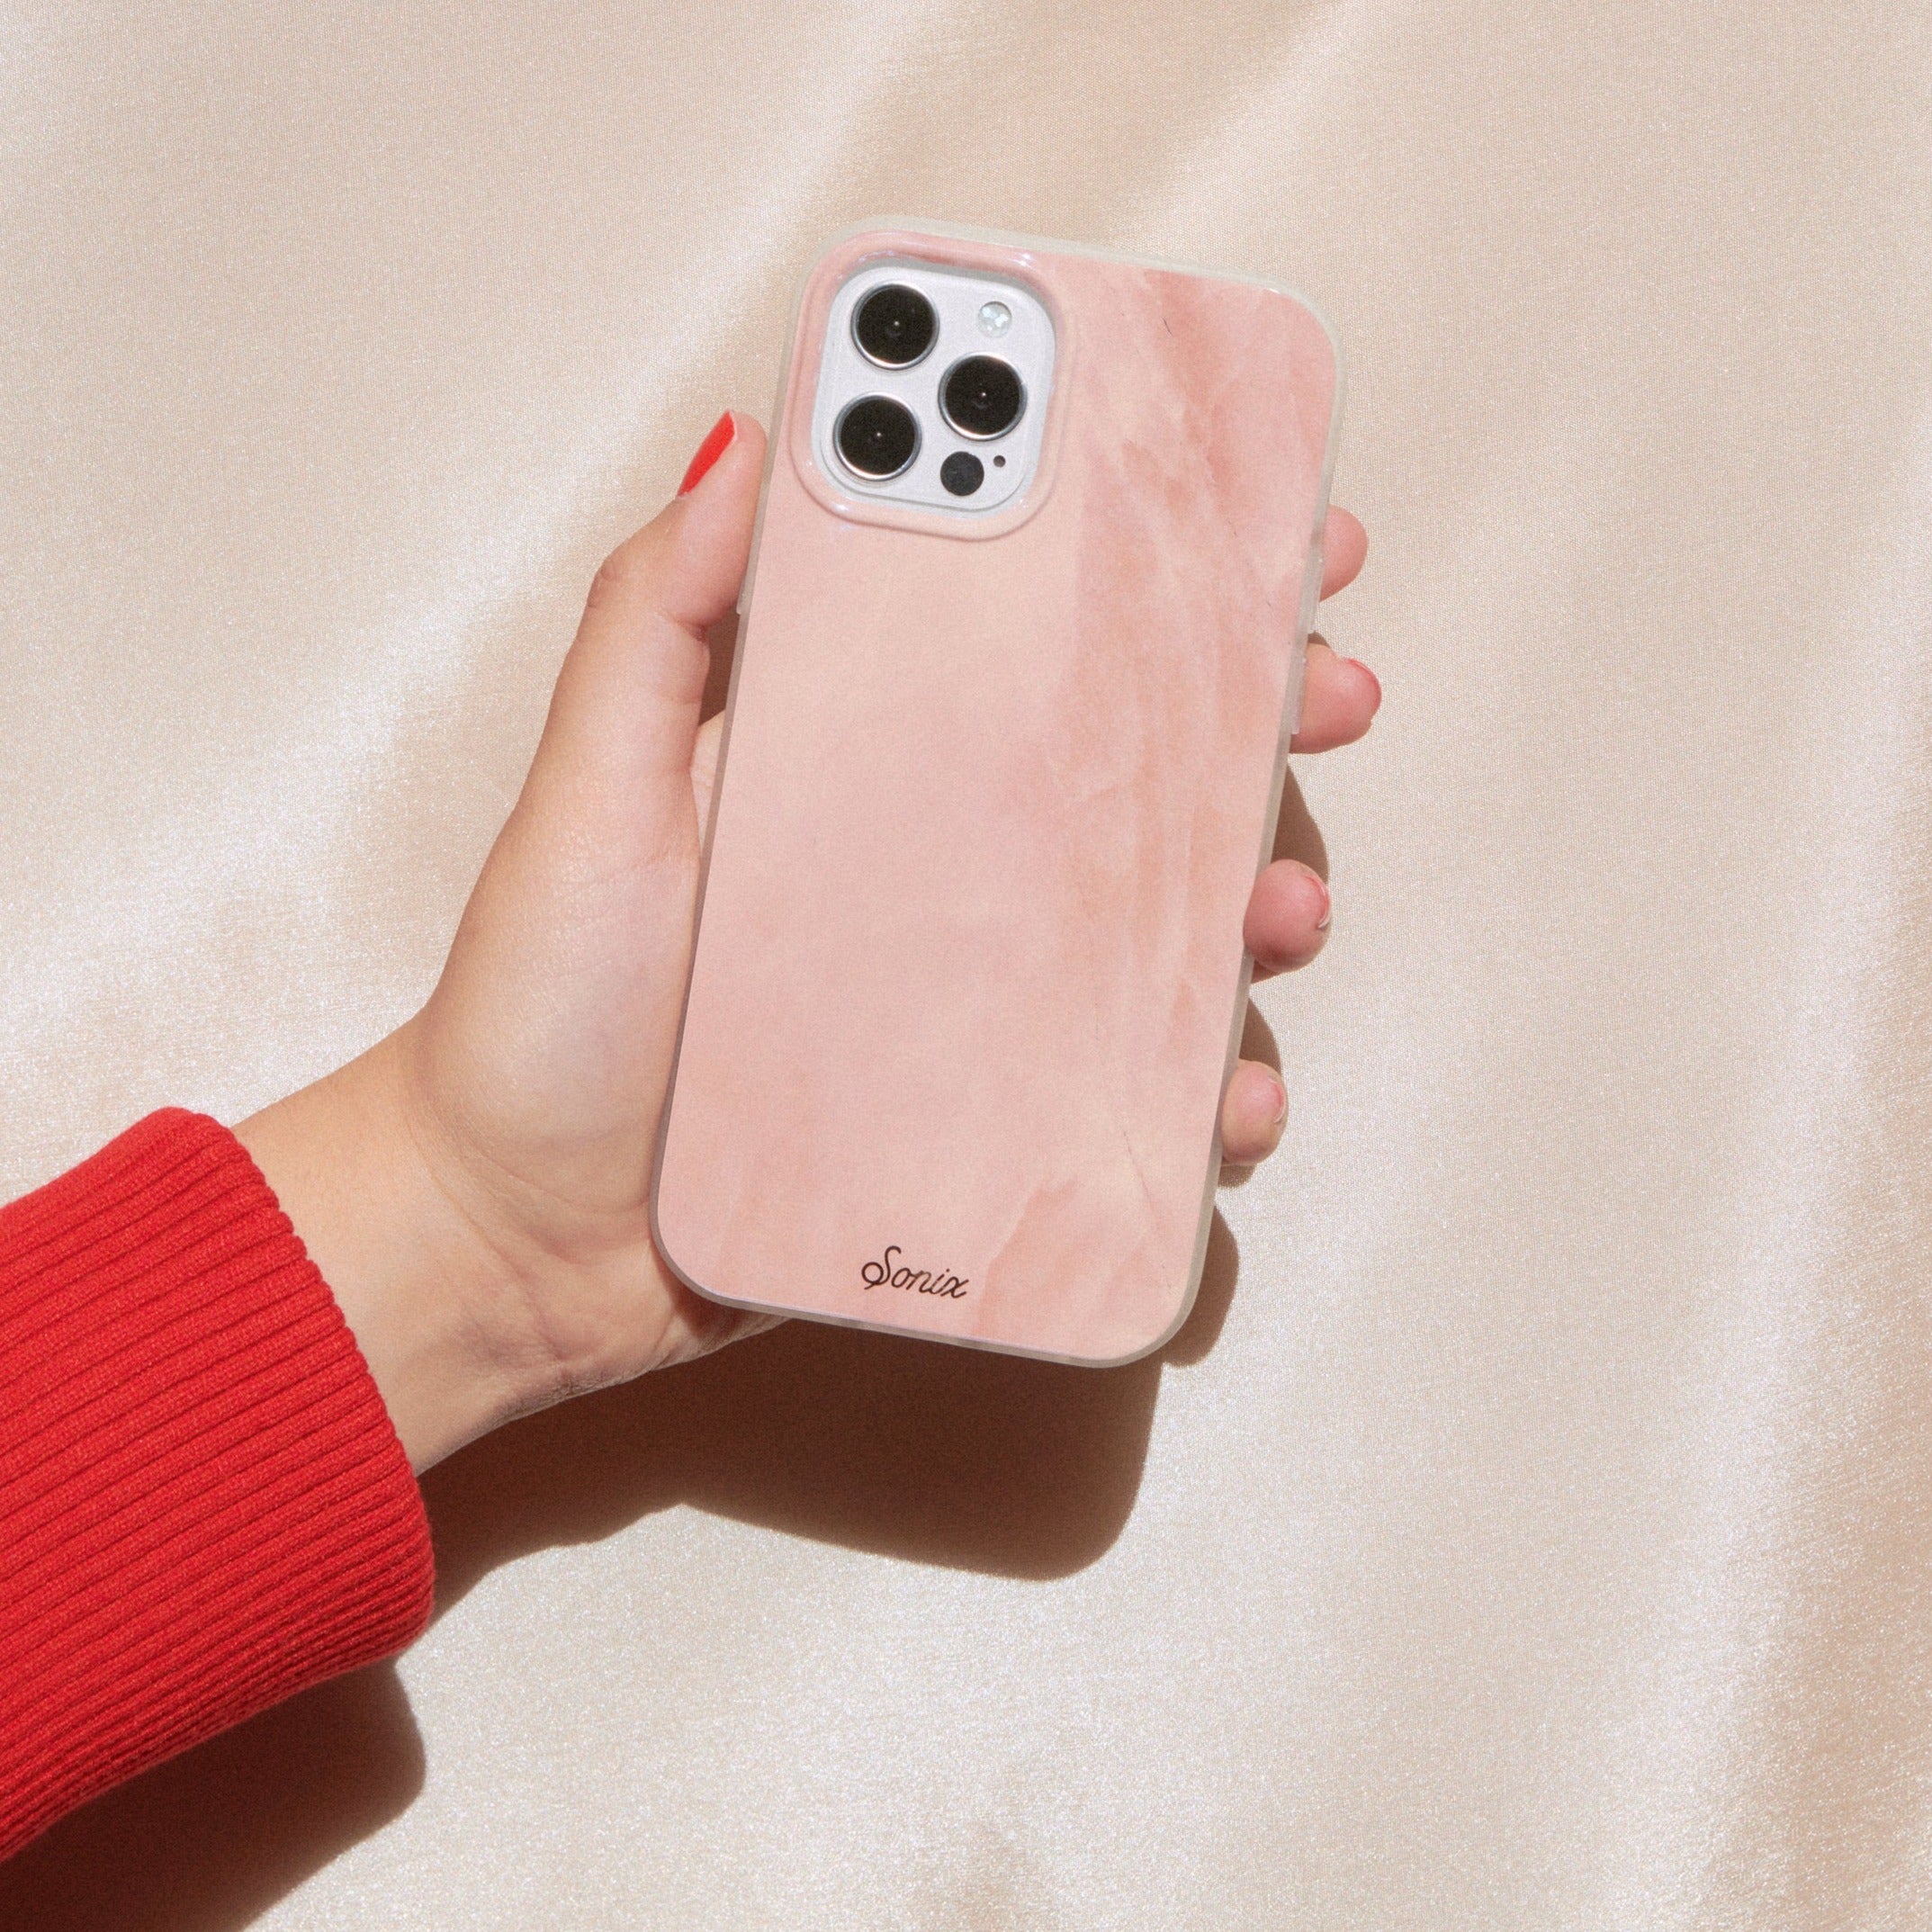 a gleaming pearl design with a pink finish shown on an iphone 12 being held by a hand with a pink background